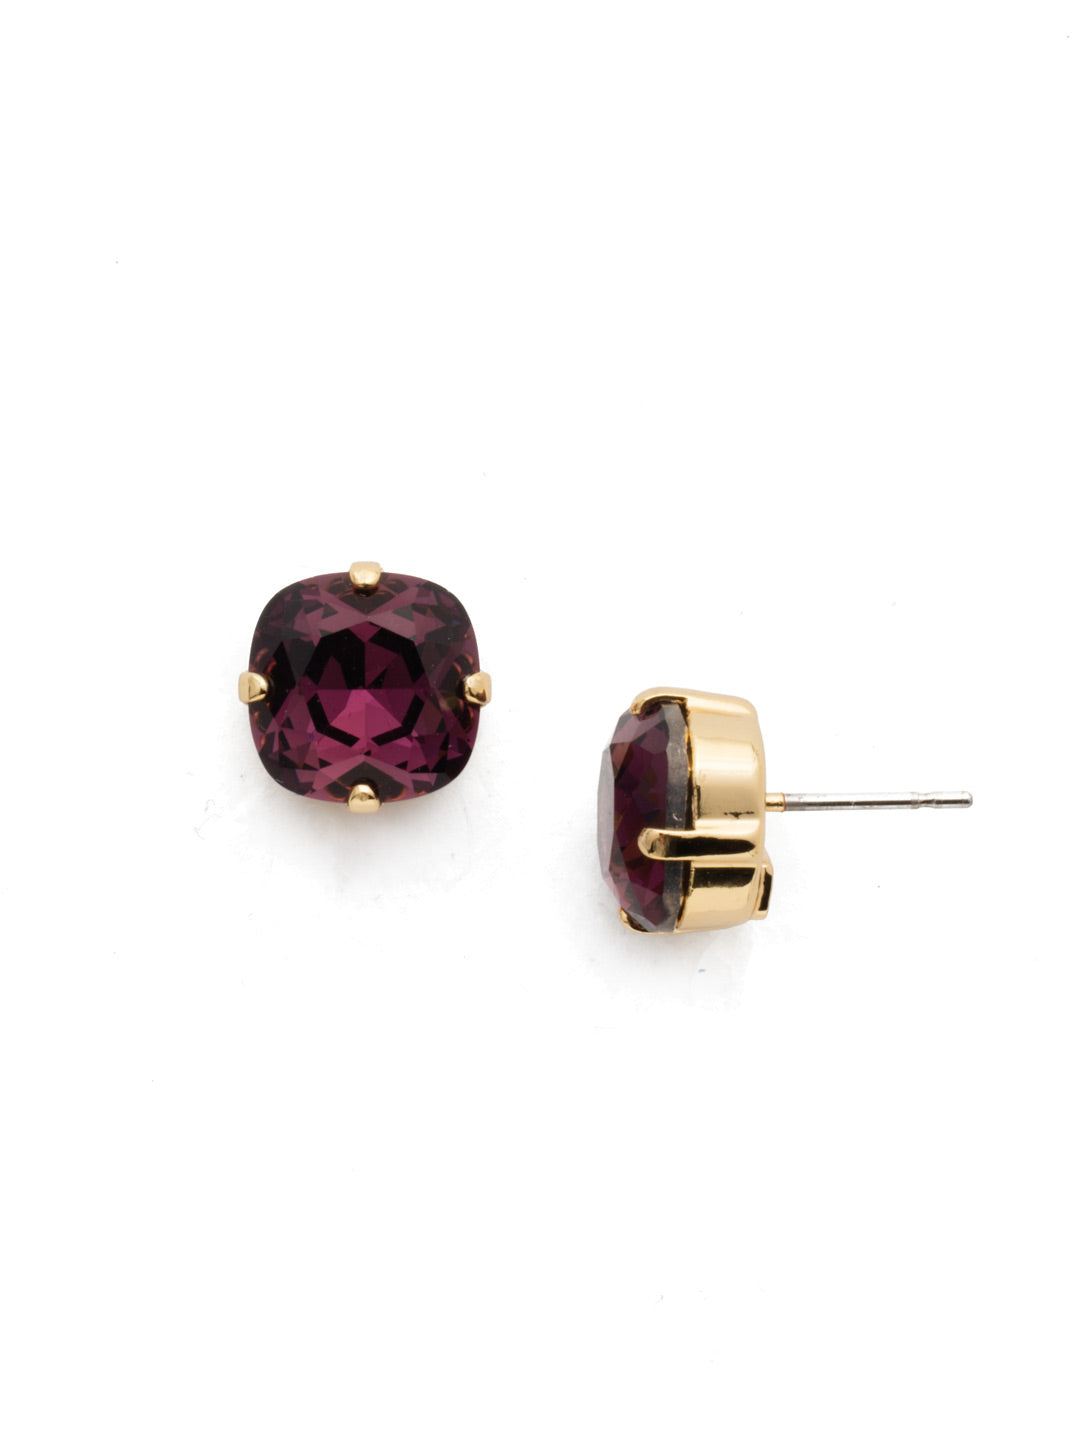 Halcyon Stud Earrings - EDH25BGAM - <p>A beautiful, luminous cushion-cut crystal in a classic four-pronged setting that's ideal for everyday wear. From Sorrelli's Amethyst collection in our Bright Gold-tone finish.</p>